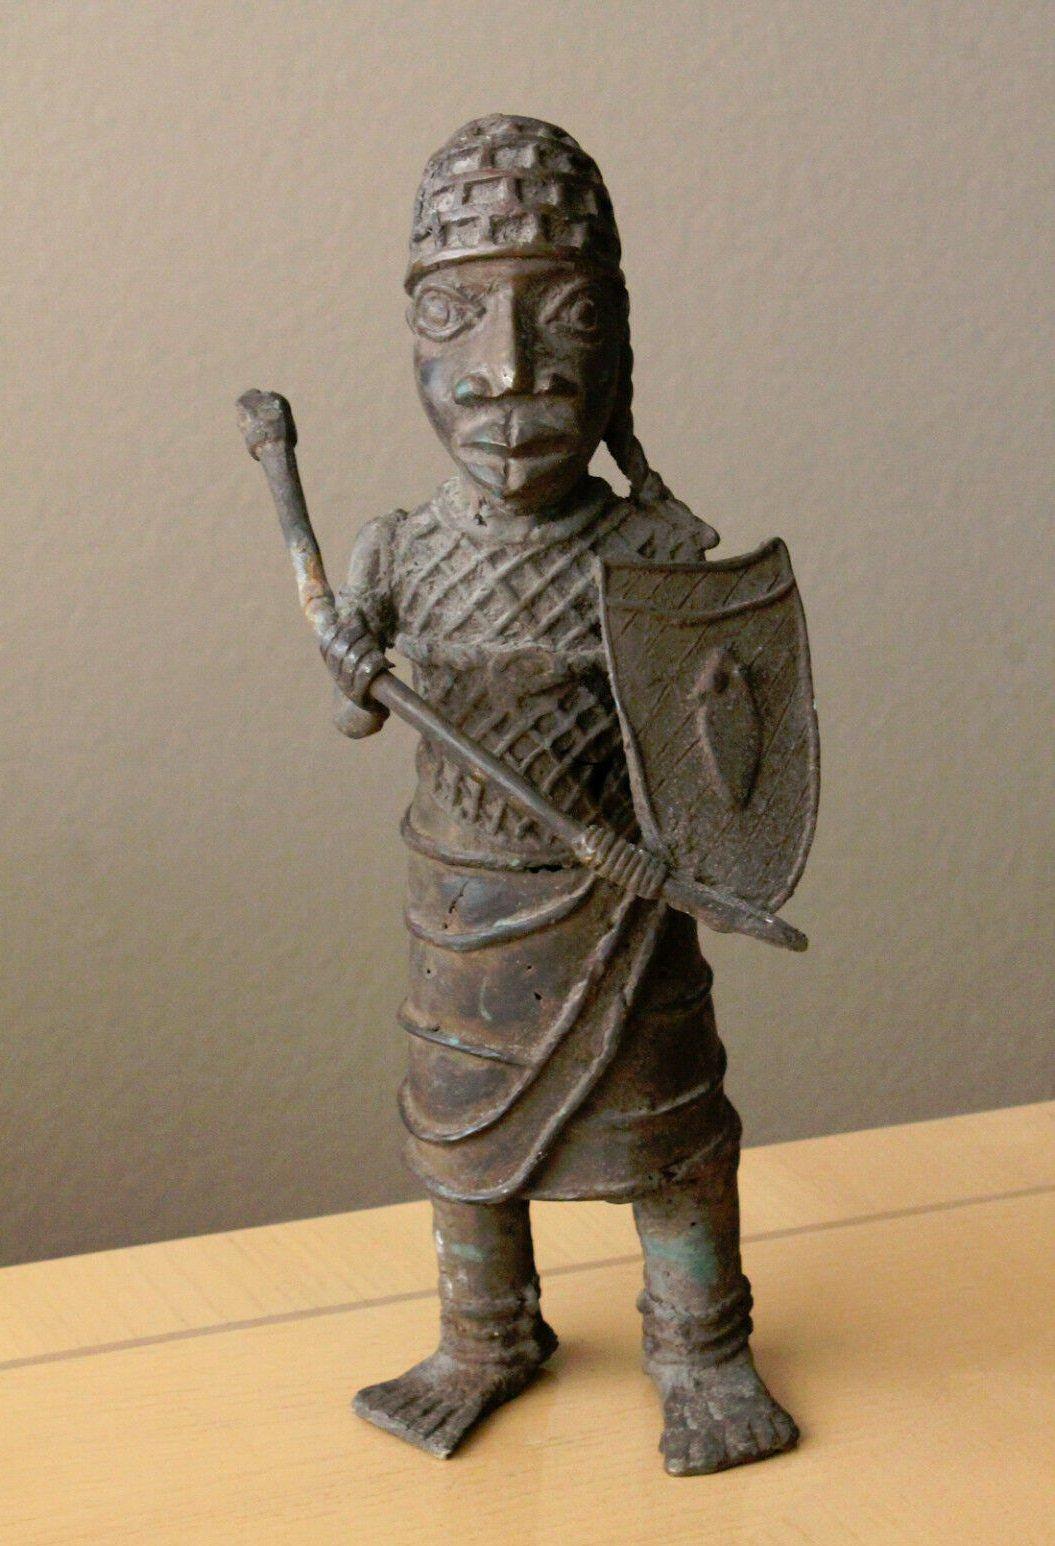 MAGNIFICENT!





BENIN OBA
19TH CENTURY BRONZE
WARRIOR SCULPTURE 
 
 
SUPERB EXAMPLE OF OBA METALWORK!
 
DIMENSIONS:  APPROXIMATELY 13